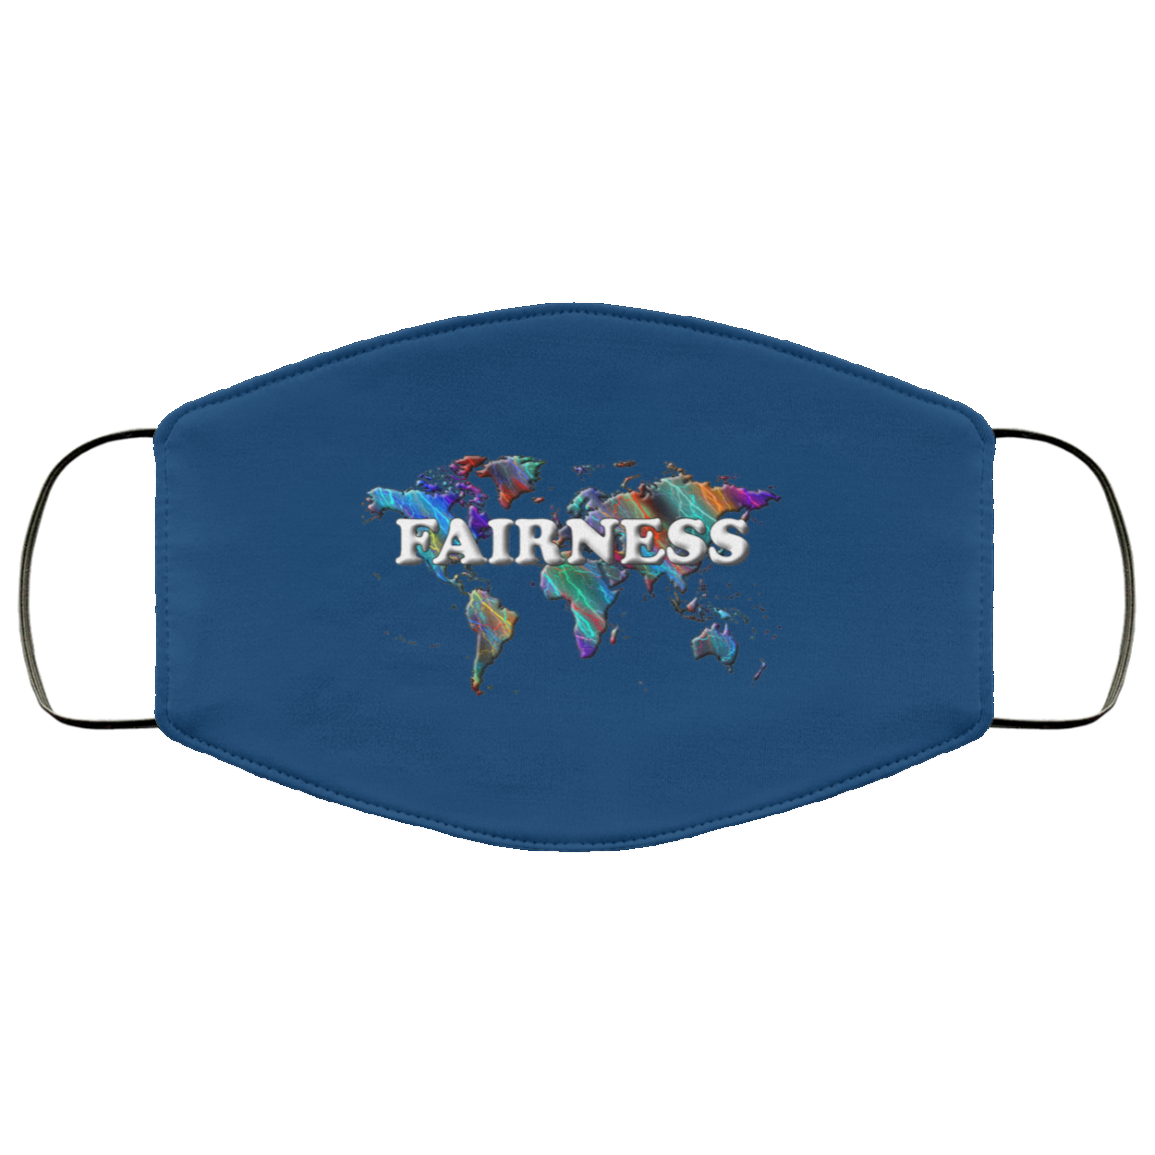 Fairness 2 Layer Protective Mask